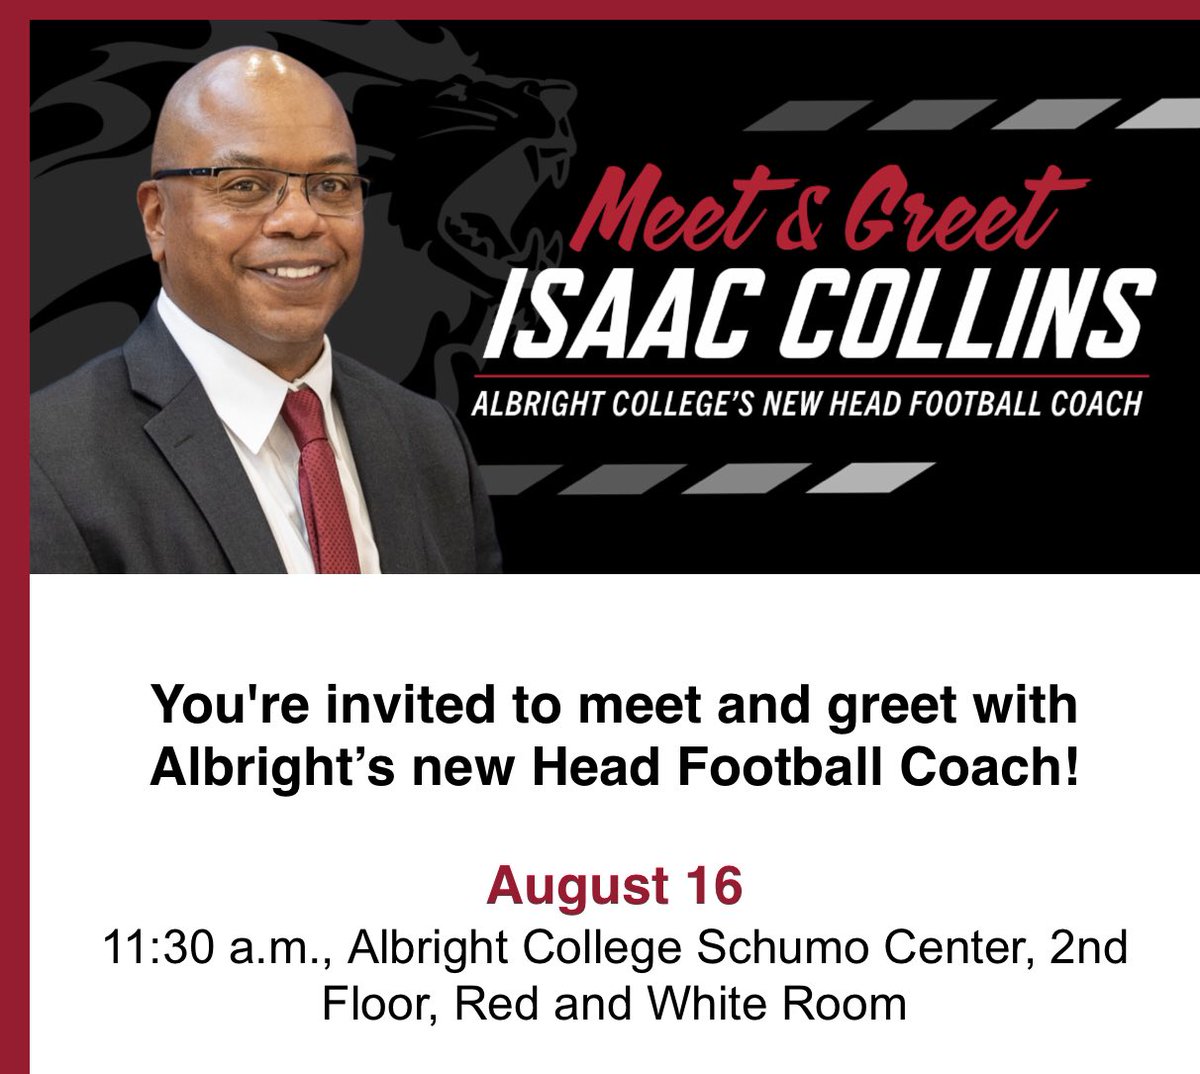 Next on the Calendar for Alumni and Friends of Albright Football. Excited to share more on Albright Football and the Upcoming Season! Register to attend event and feel free to catch Training Camp Practice before event we will practice 9-11am that day. albright.360alumni.com/events/view/93…